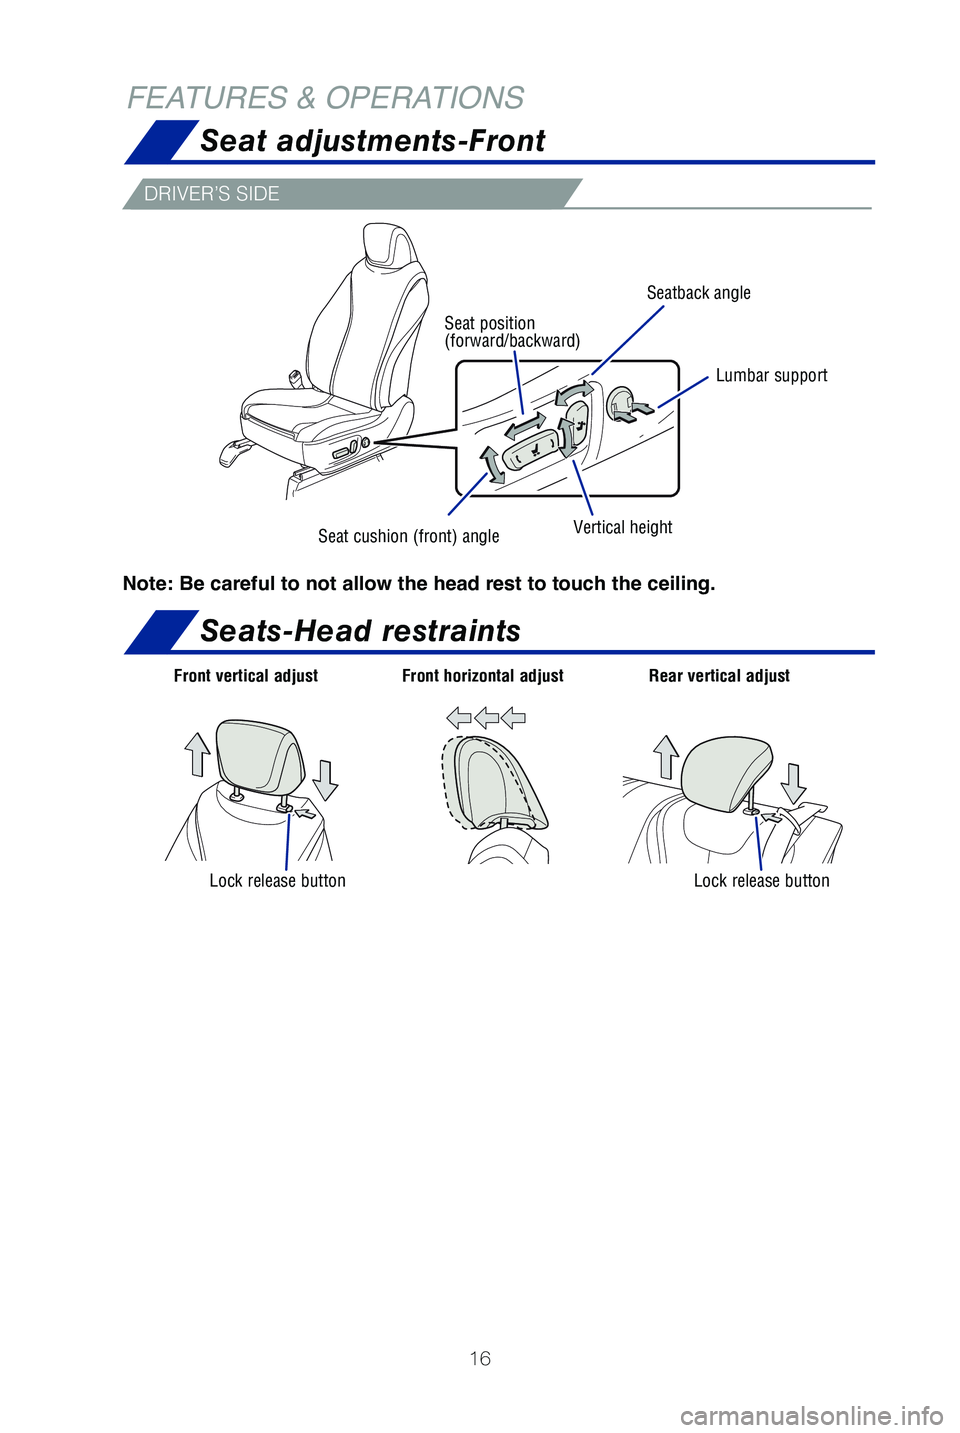 TOYOTA MIRAI 2019  Owners Manual (in English) 16
FEATURES & OPERATIONSSeat adjustments-Front
Seats-Head restraints
DRIVER’S SIDE
Note: Be careful to not allow the head rest to touch the ceiling.
Seatback angle
Lumbar support
Vertical heightSeat